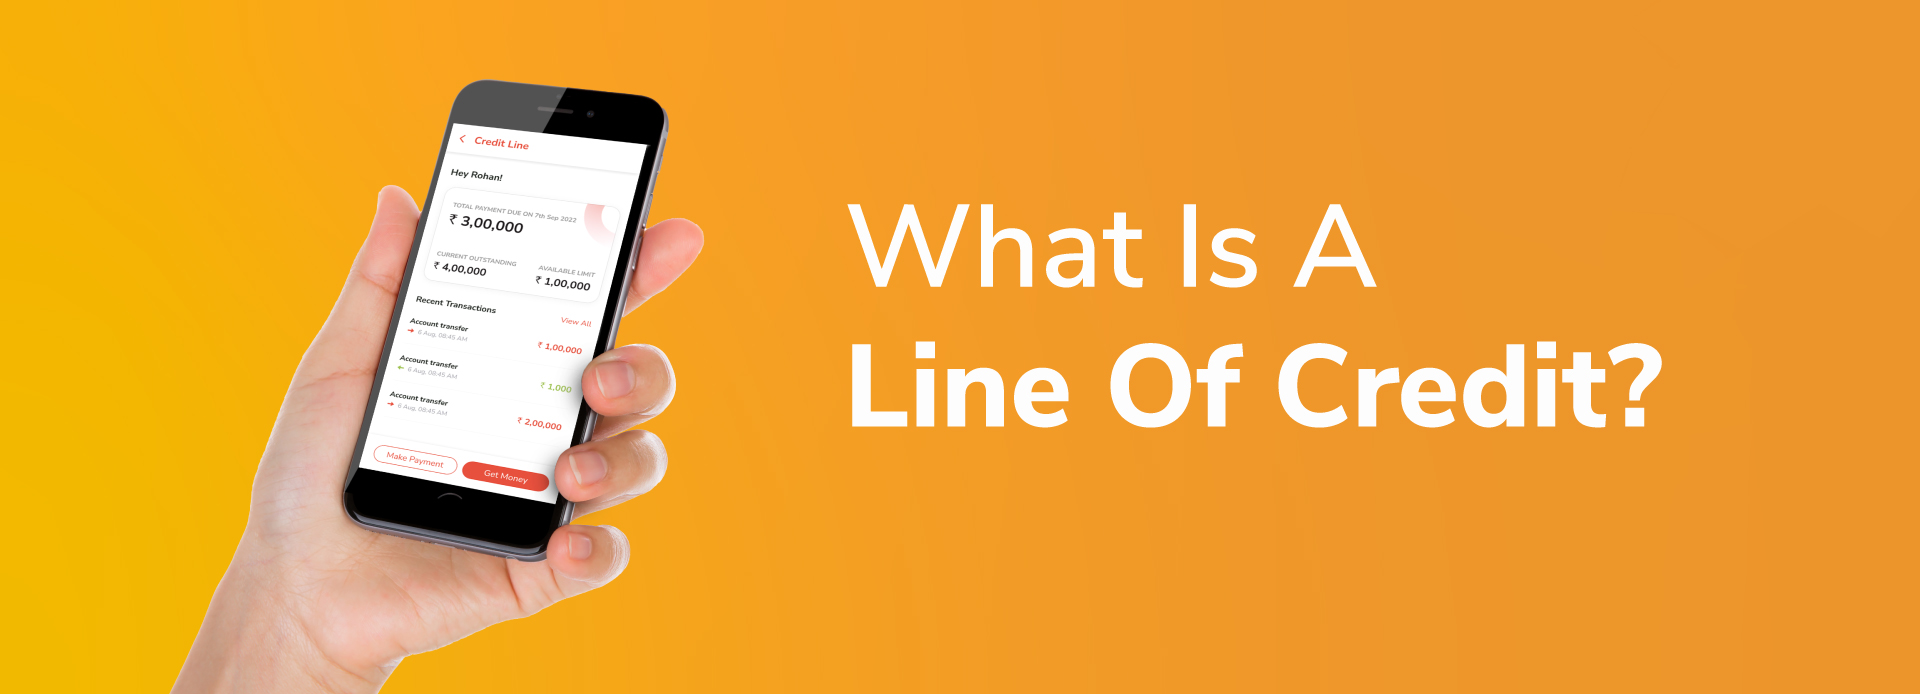 What Is A Line Of Credit?